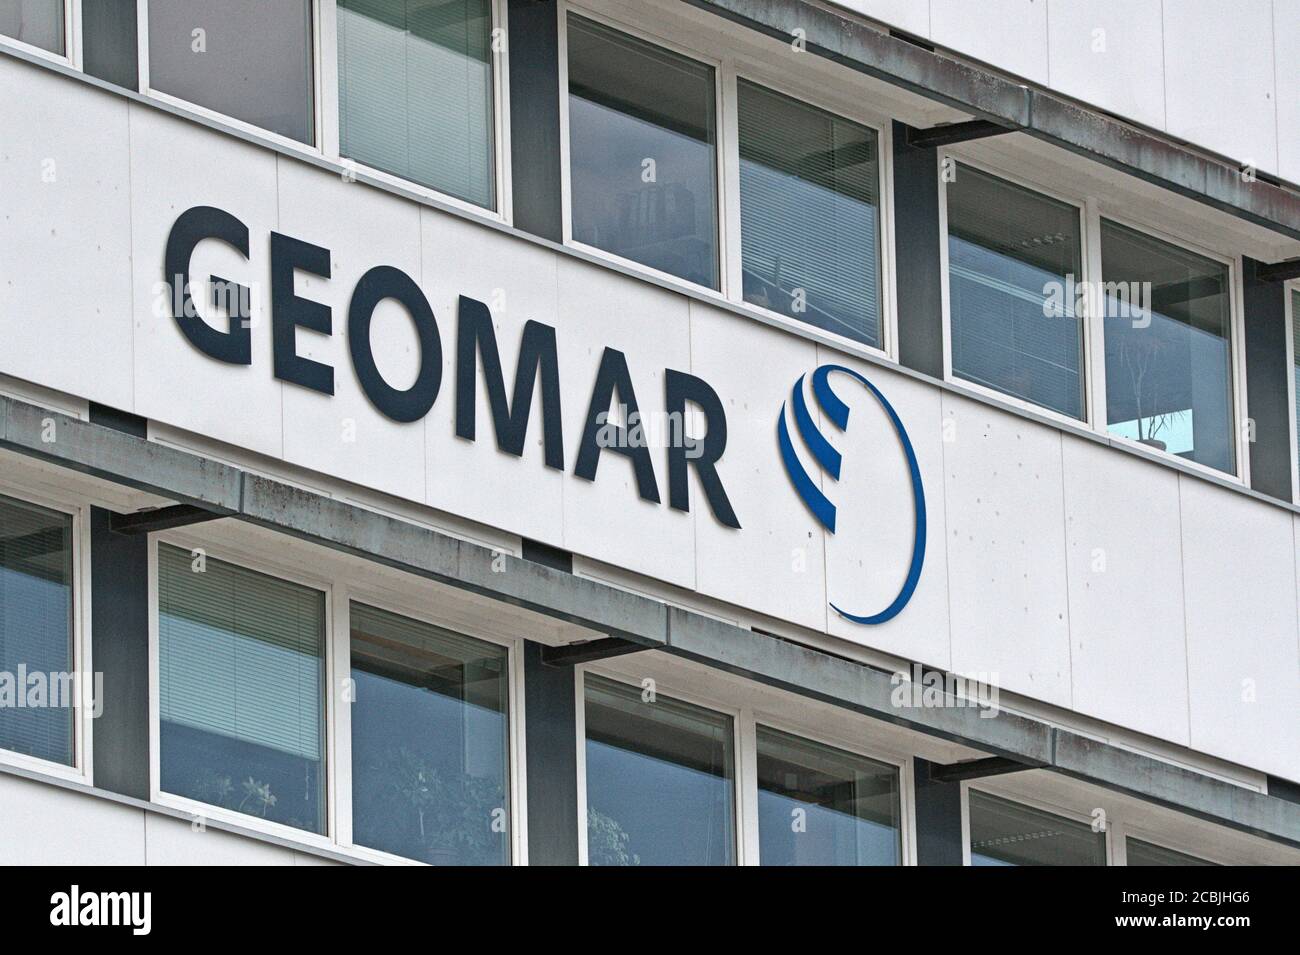 August 1st, 2020, Kiel, the Geomar Helmholtz Center for Ocean Research Kiel at the Westufer location in Dusternbrooker Weg 20, 24105 Kiel. View from the water side of the Kieler Forde on the keel line to the Geomar logo on the house facade. | usage worldwide Stock Photo